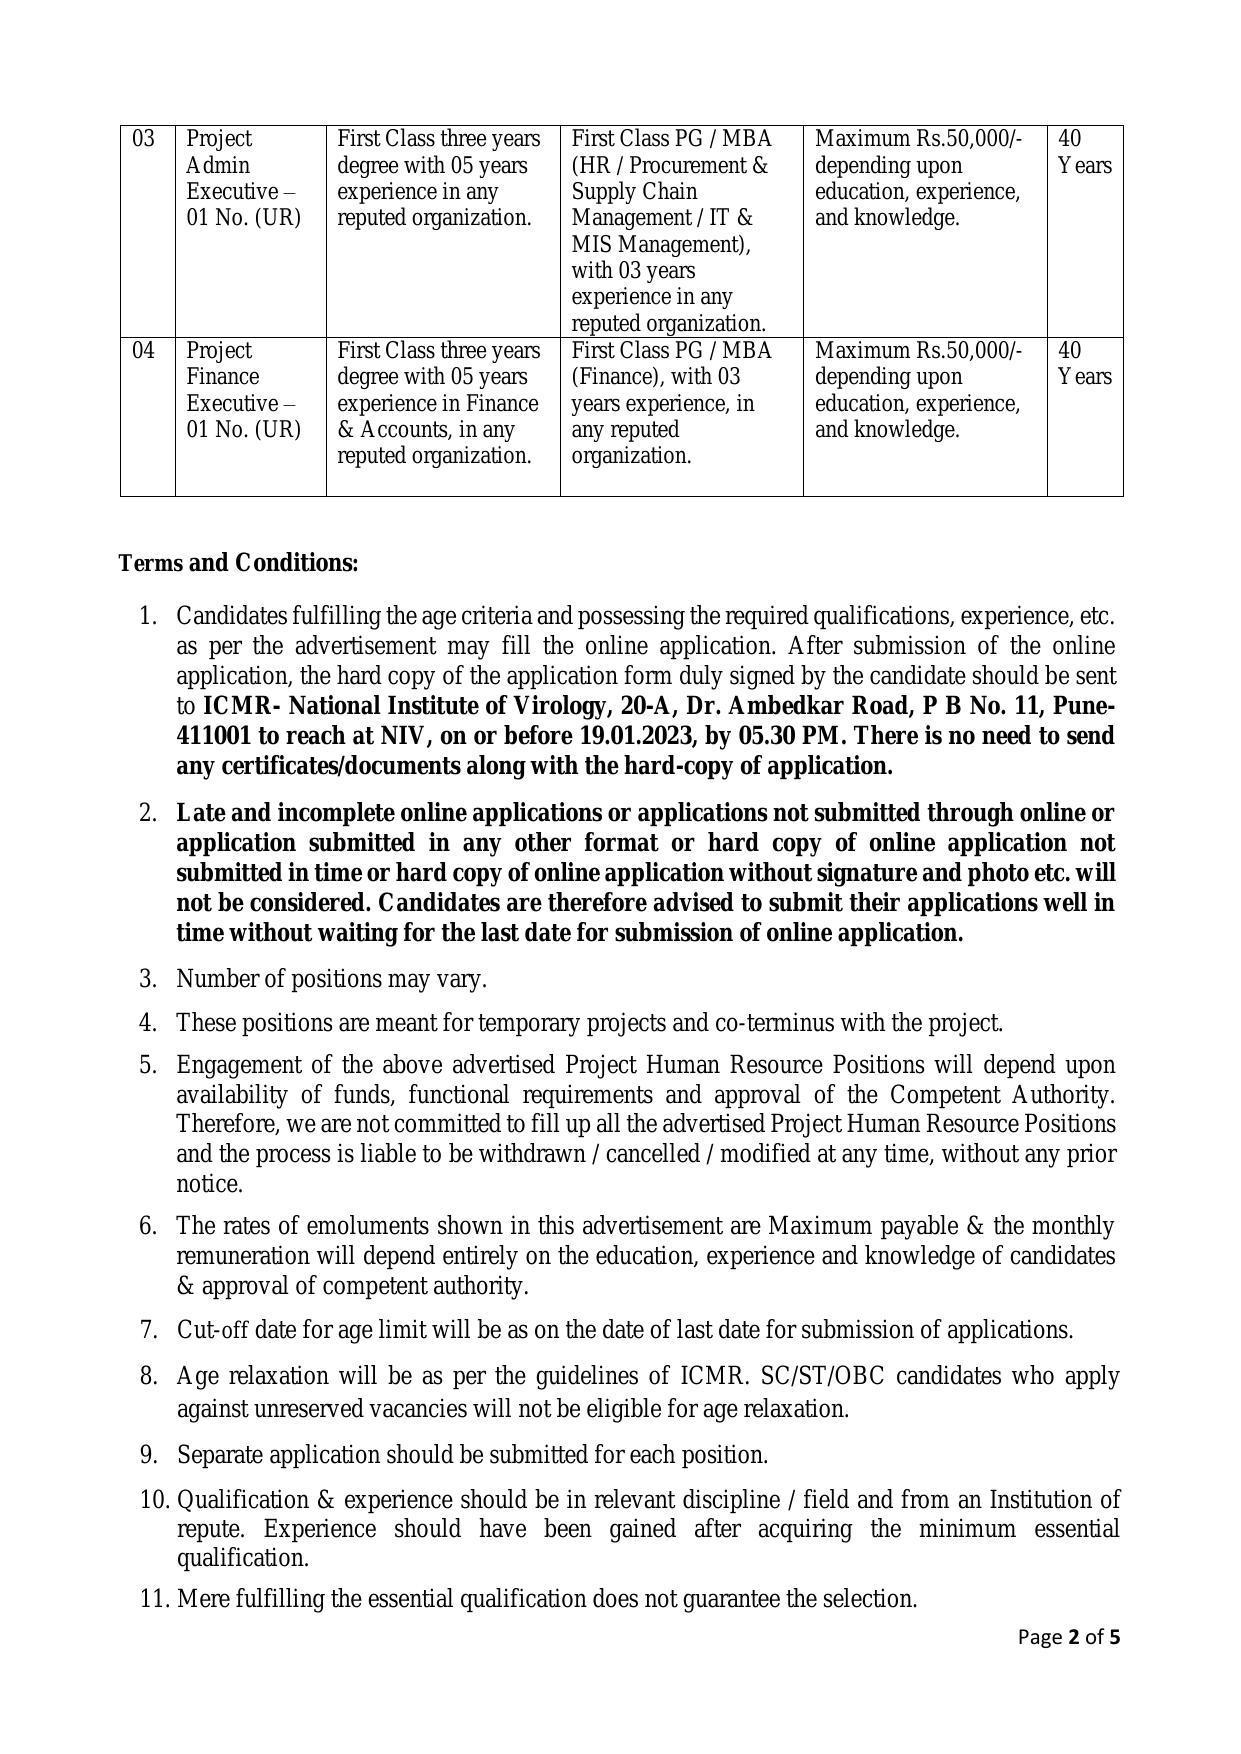 NARI Invites Application for Project Finance Executive, Project Admin Executive, More Vacancies Recruitment 2023 - Page 1